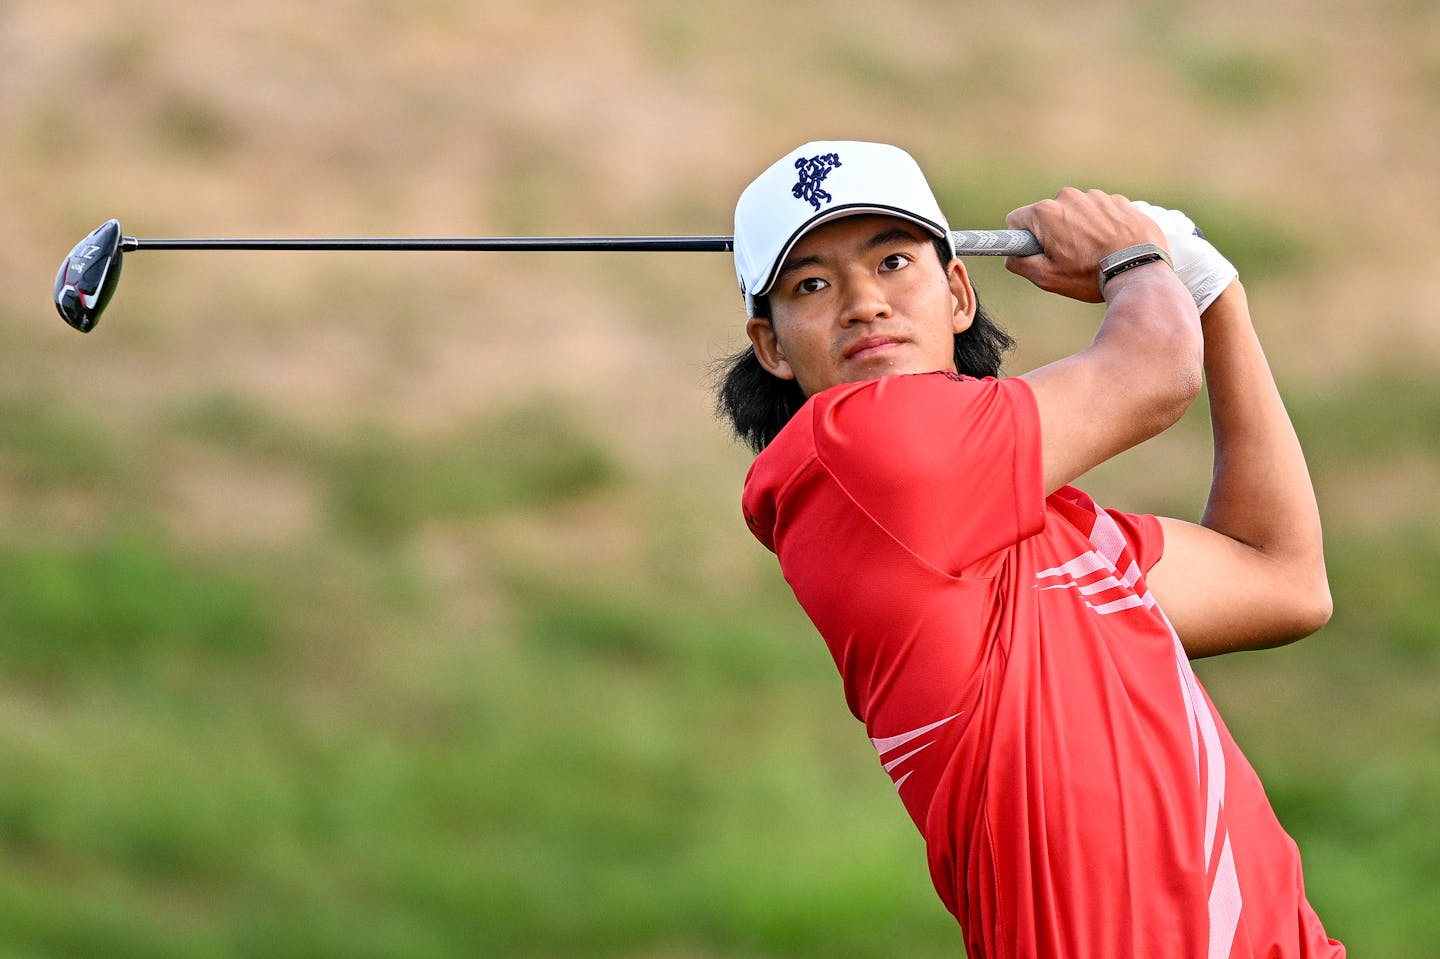 PARIS, FRANCE - SEPTEMBER 01: Taichi Kho of Hong Kong plays his tee shot on the 1st hole during Day Two of the 2022 World Amateur Team Golf Championships - Eisenhower Trophy competition at Le Golf National on September 1, 2022 in Paris, France. (Photo by Octavio Passos/Getty Images)